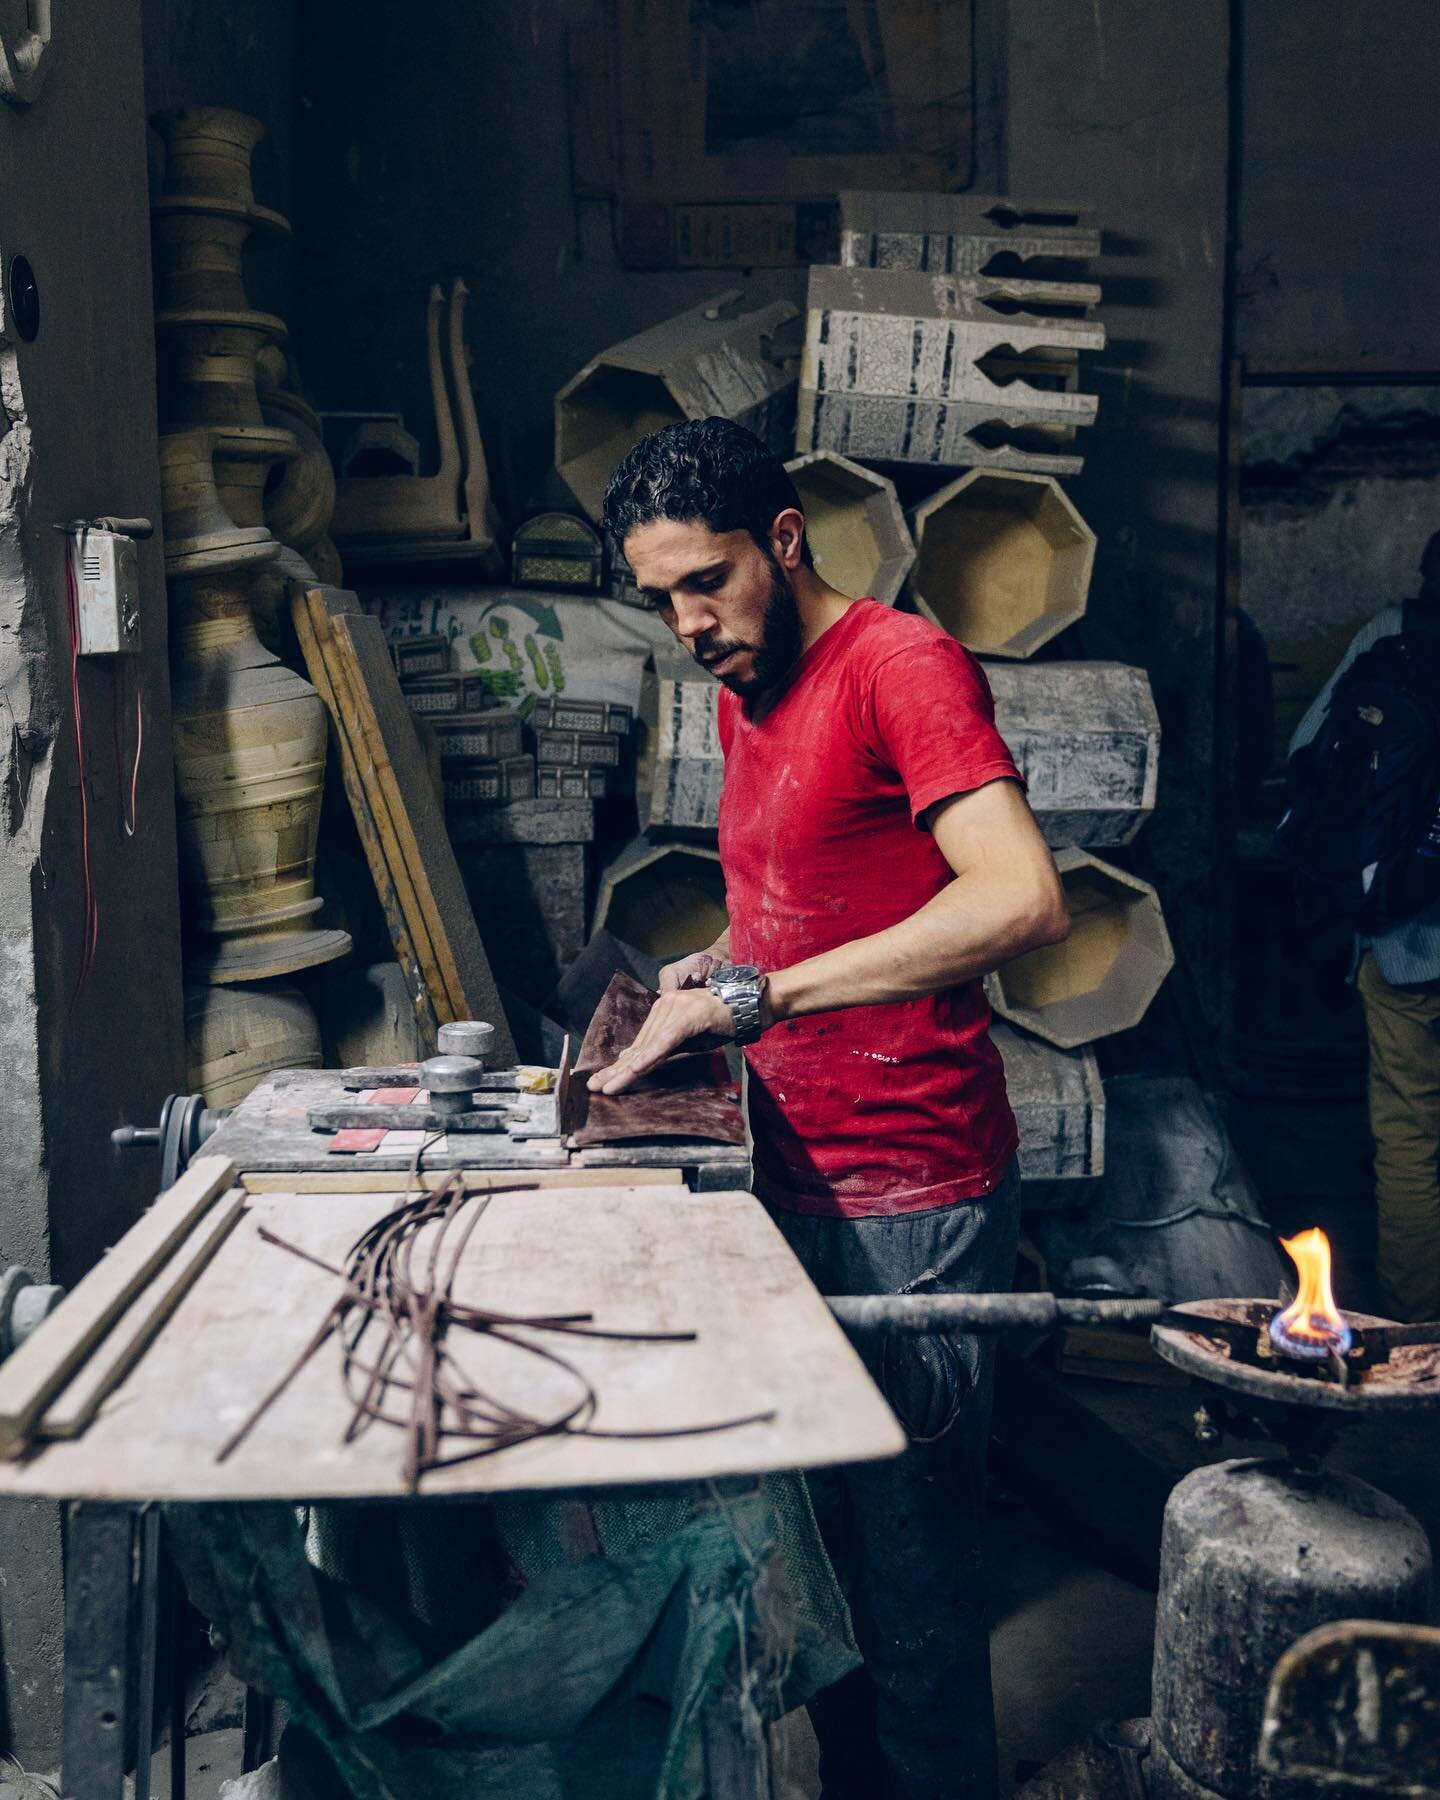 Somewhere in the labrythine depths of al darb al ahmar, an artisan neighbourhood in the heart of historic Cairo. An artisan at work creating coffee tables decorated in geometric patterns of mother of pearl.
&mdash;&mdash;&mdash;
#cairo #aldarbalahmar